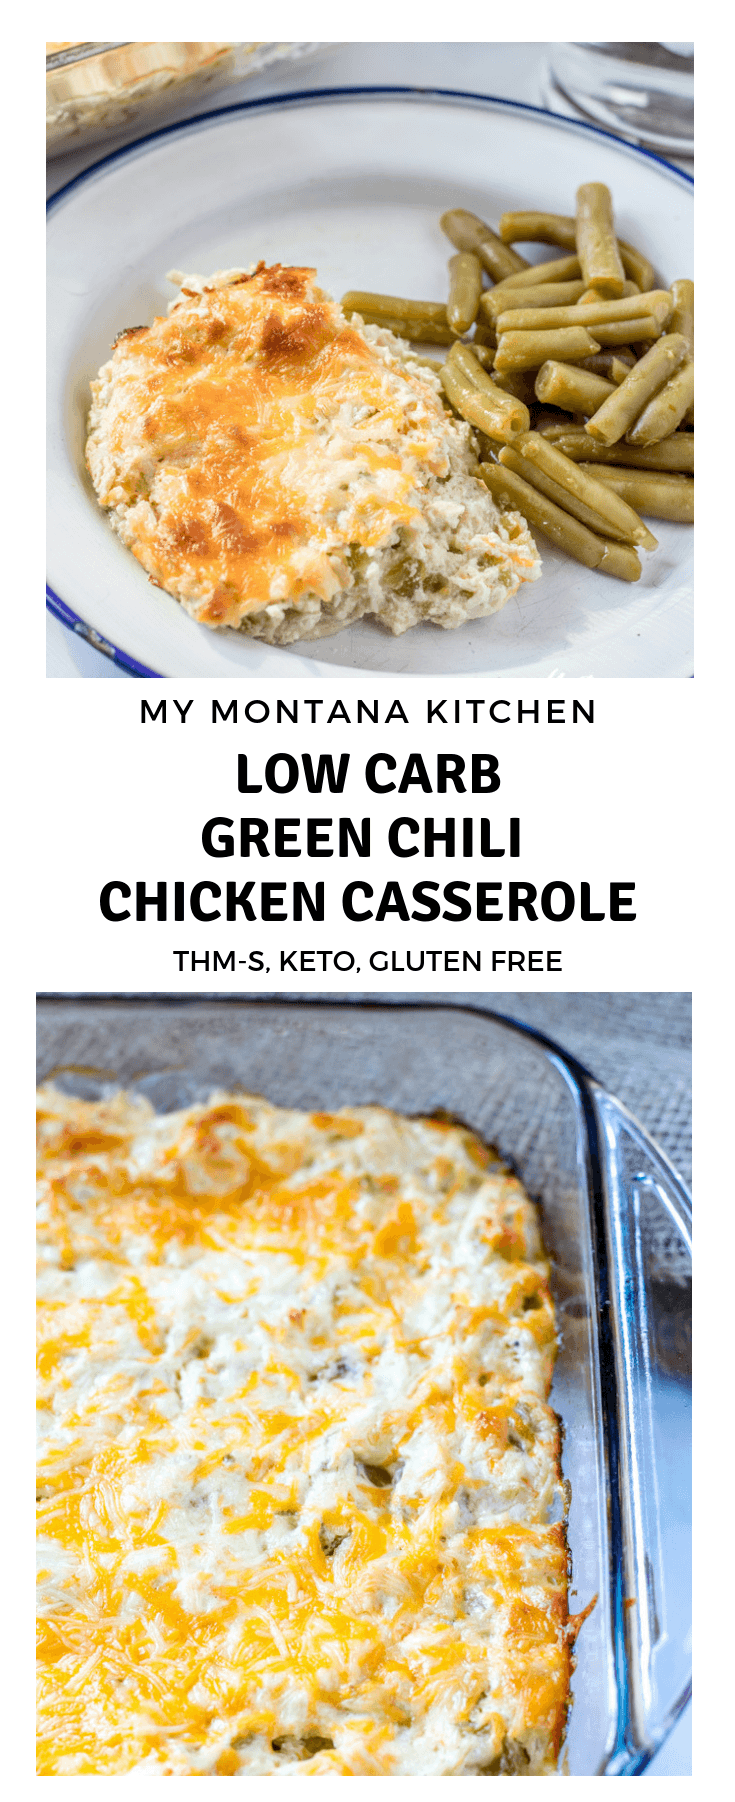 This easy chicken casserole with green chiles is perfect for those times you need an easy dinner recipe and are craving some healthy comfort food, too. This low carb chicken casserole will be a hit with the whole family! #keto #lowcarb #chickencasserole #lowcarbcasserole #trimhealthymama #thm #thms #greenchiles #mexicanfood #glutenfree #lowcarb